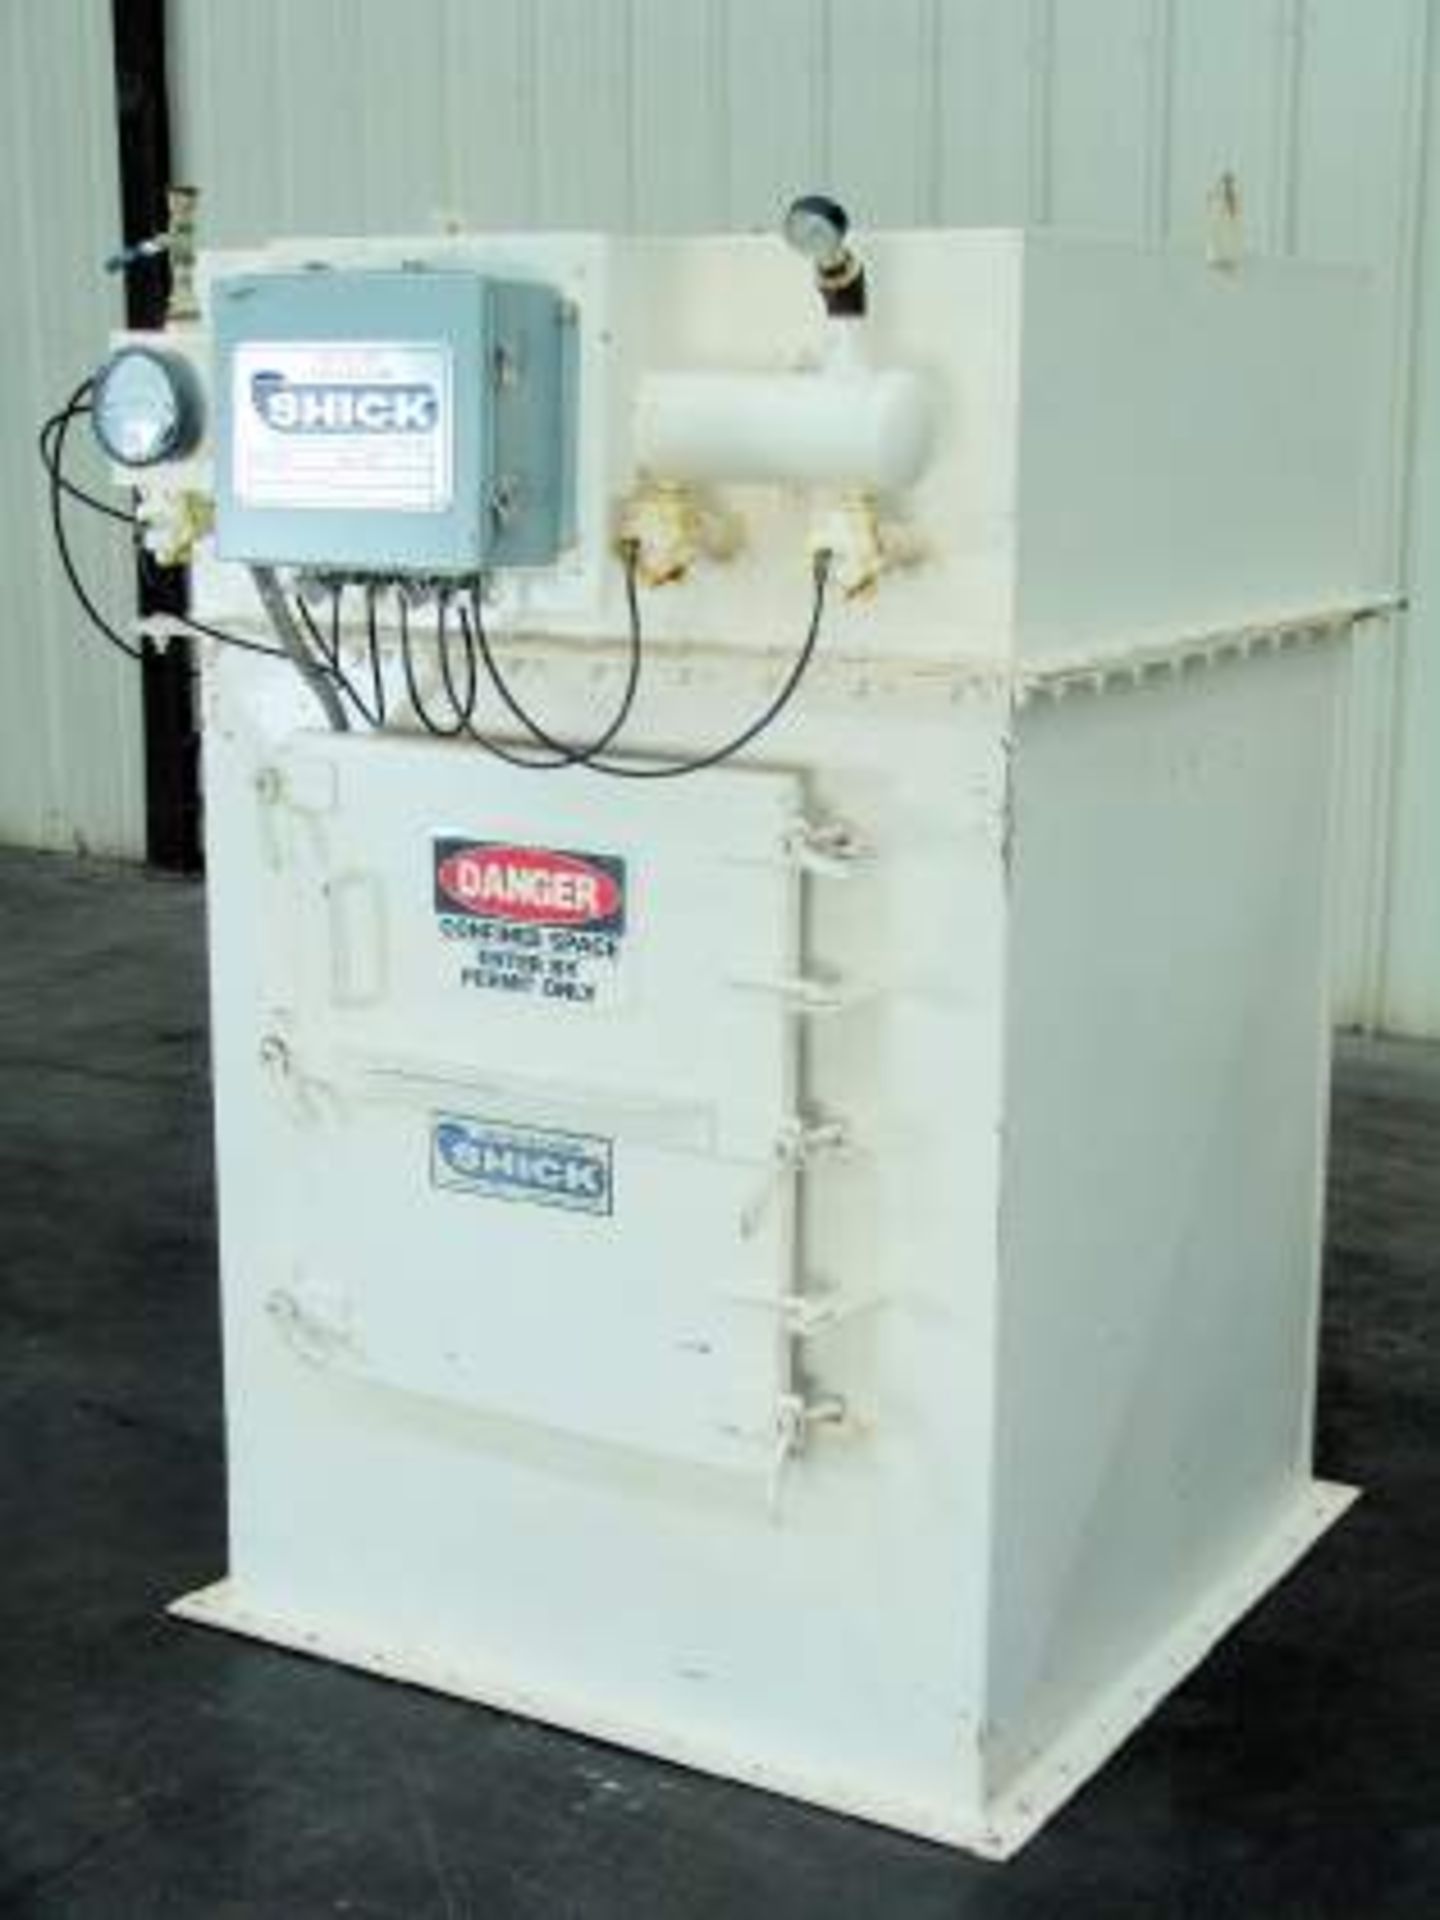 Shick 36AJ25 Top Loading Bin Dust Collector System (Rigging Fee - $220)